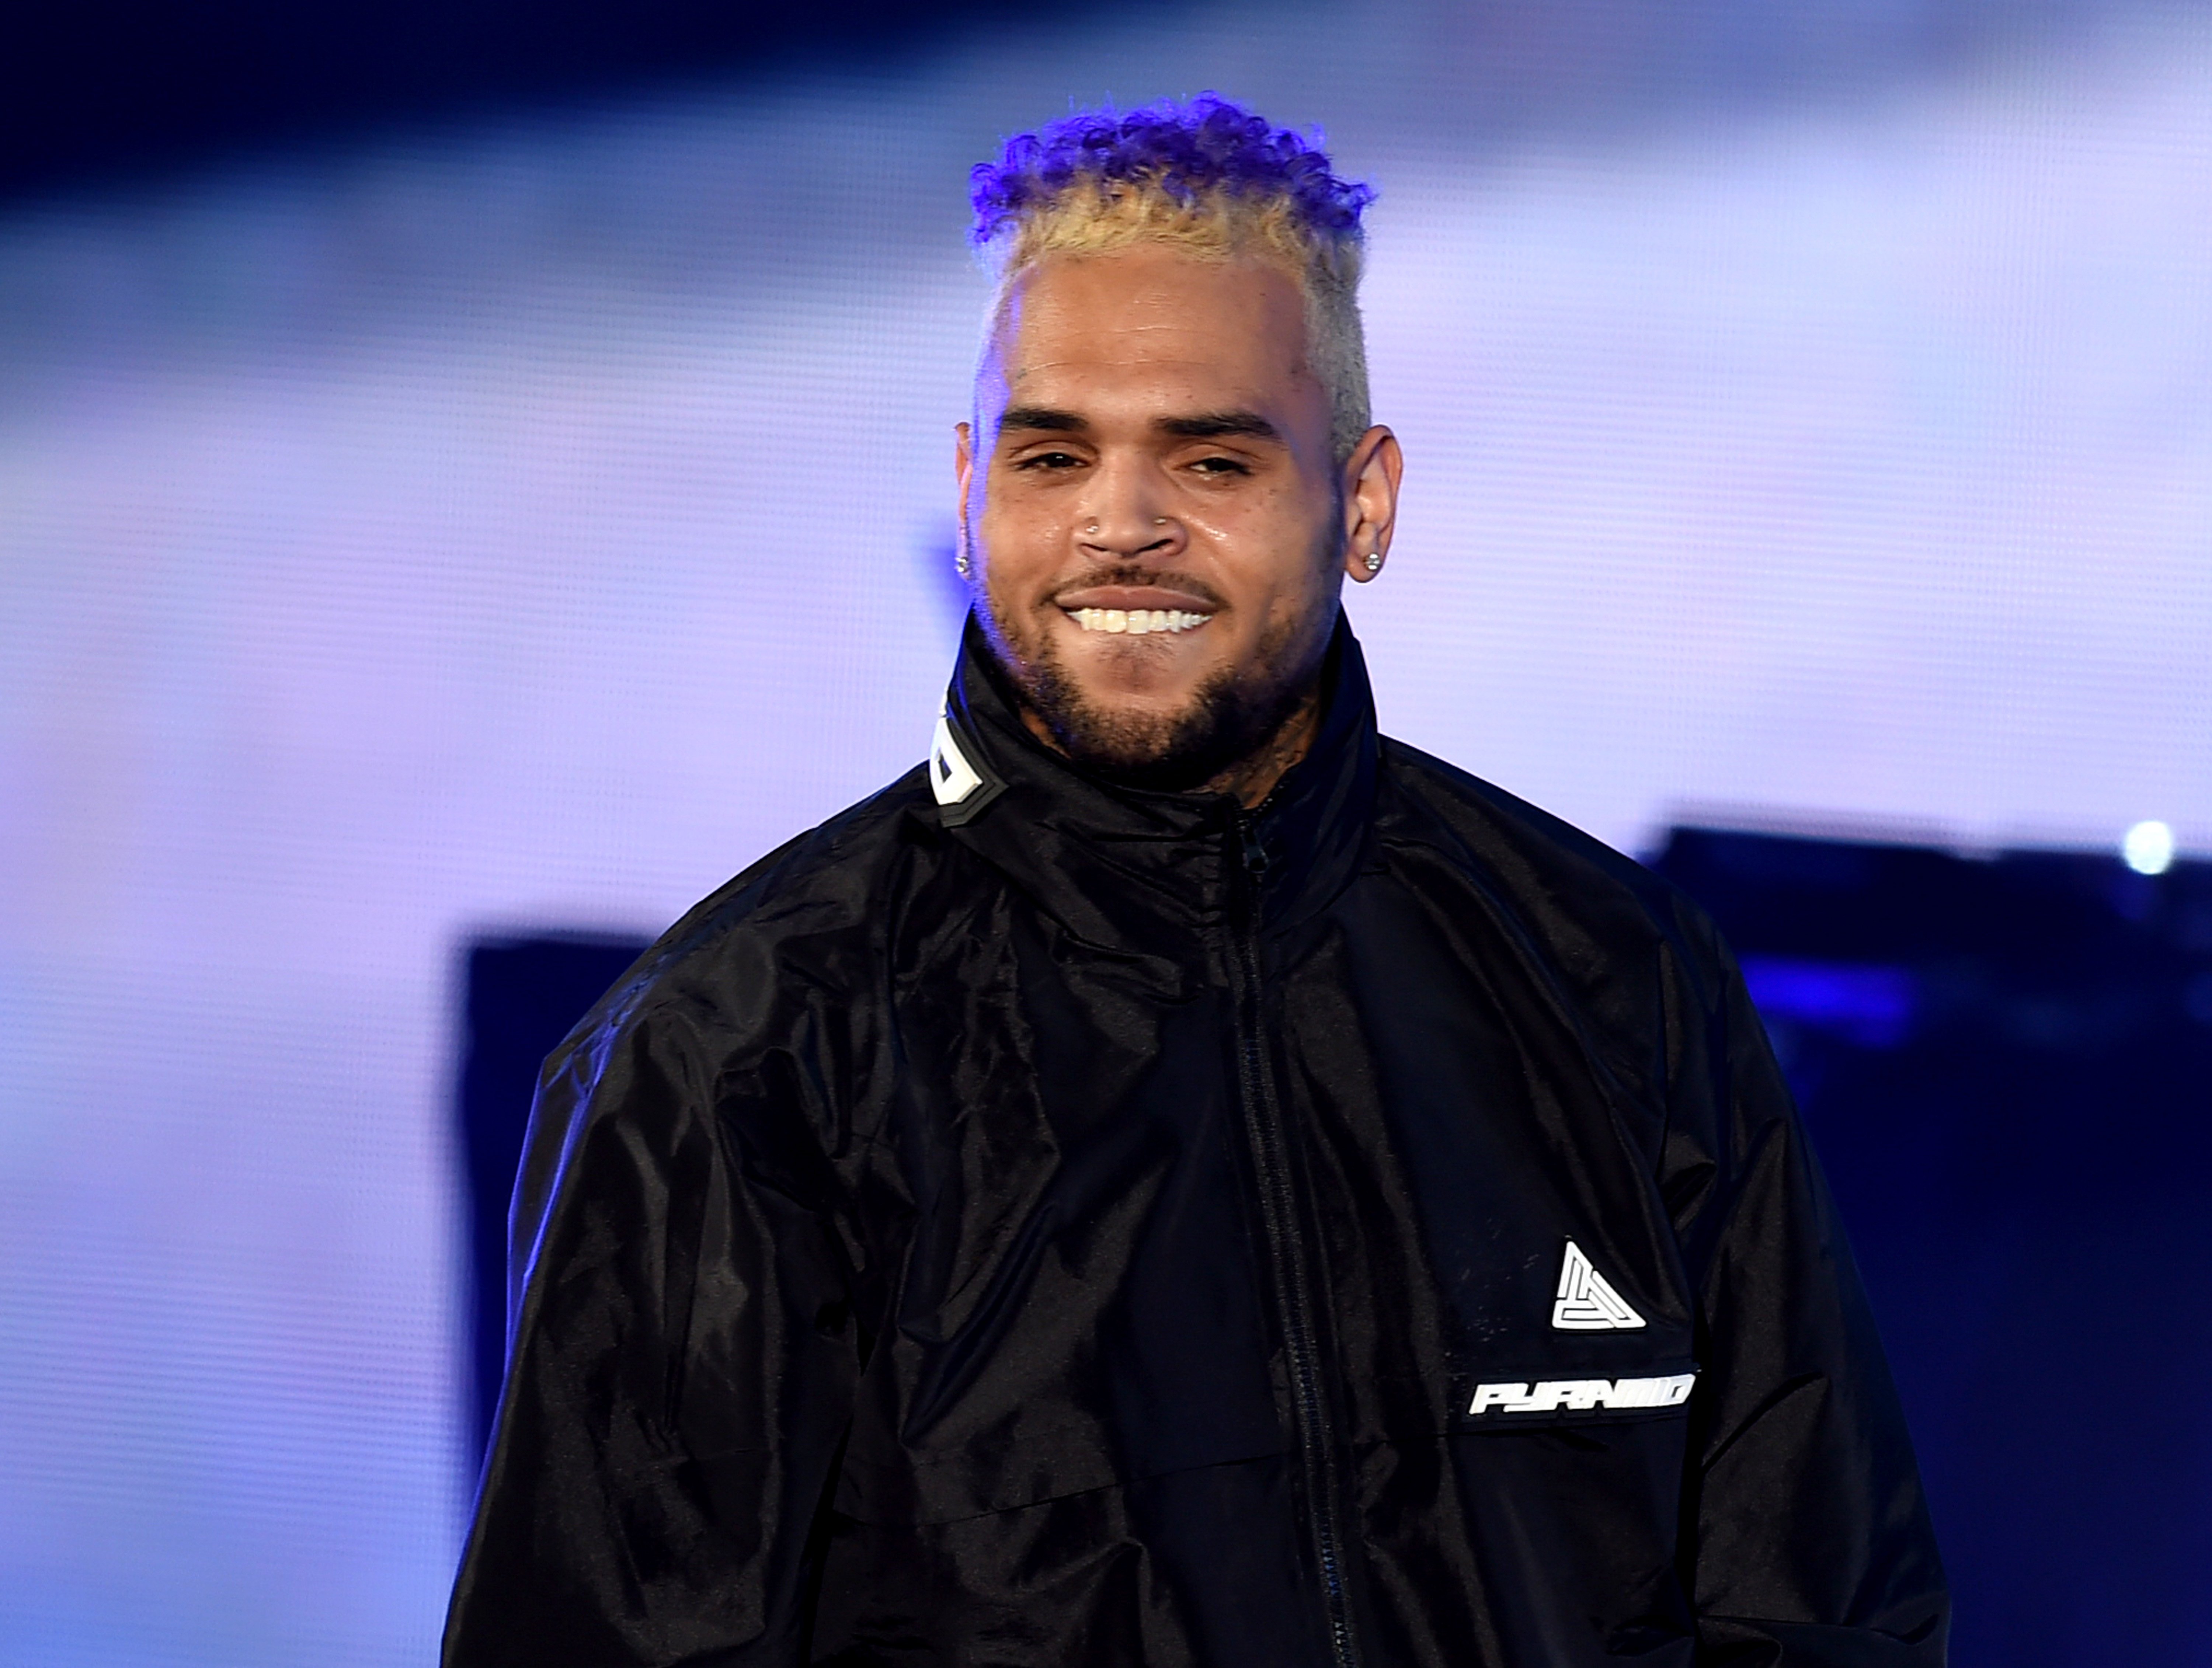  Chris Brown performs onstage during "We Can Survive, A Radio.com Event" on October 20, 2018 in Los Angeles, California | Photo: Getty Images.